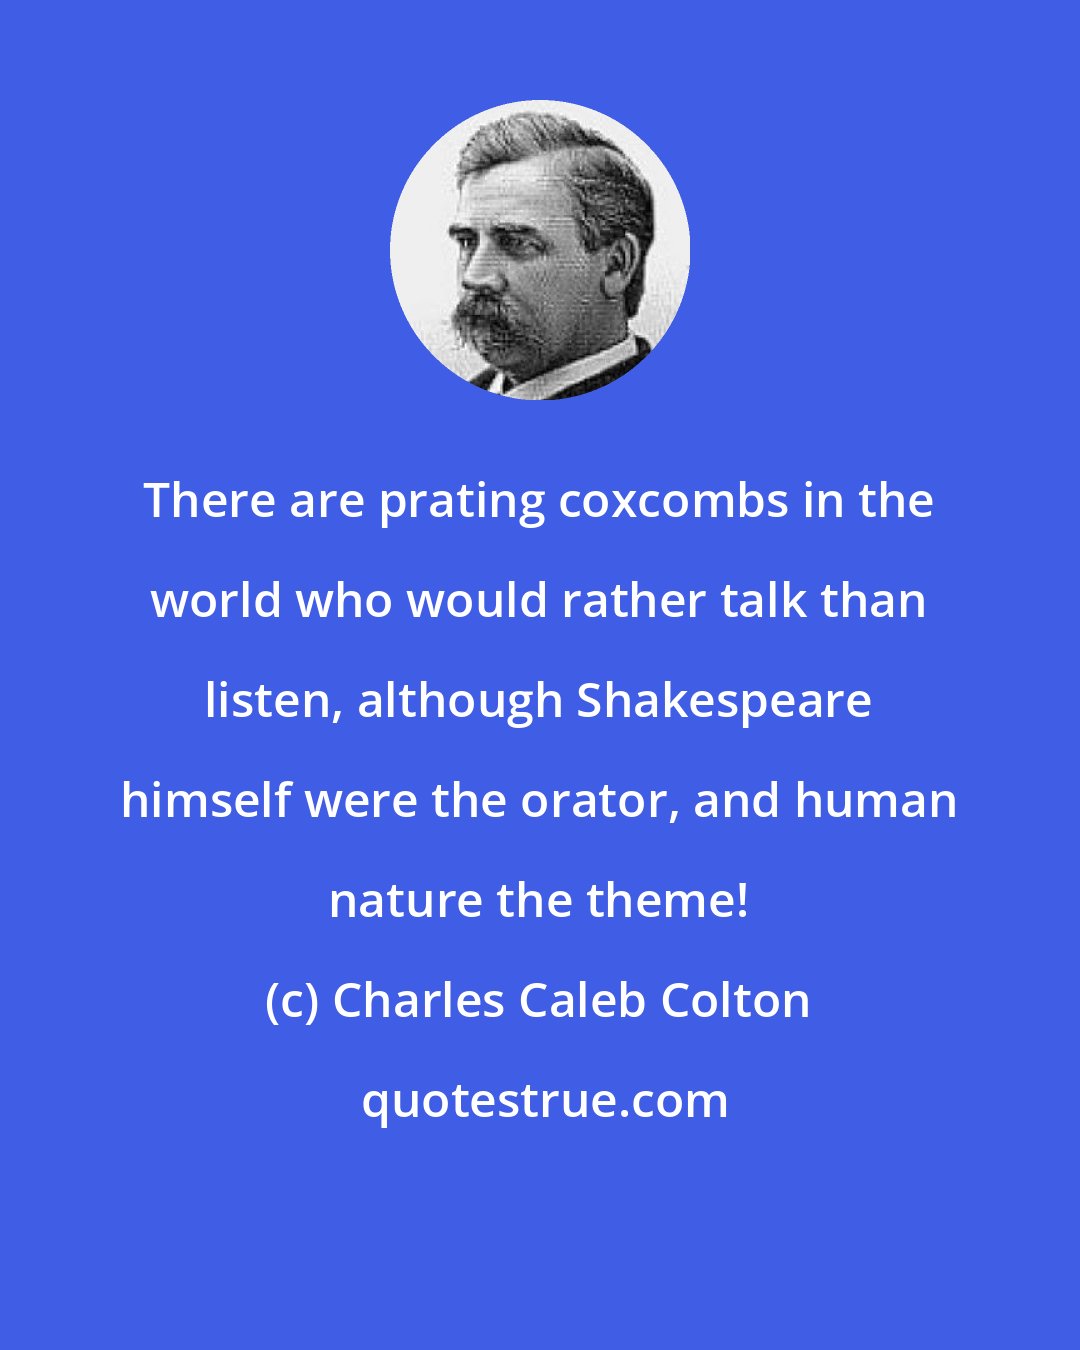 Charles Caleb Colton: There are prating coxcombs in the world who would rather talk than listen, although Shakespeare himself were the orator, and human nature the theme!